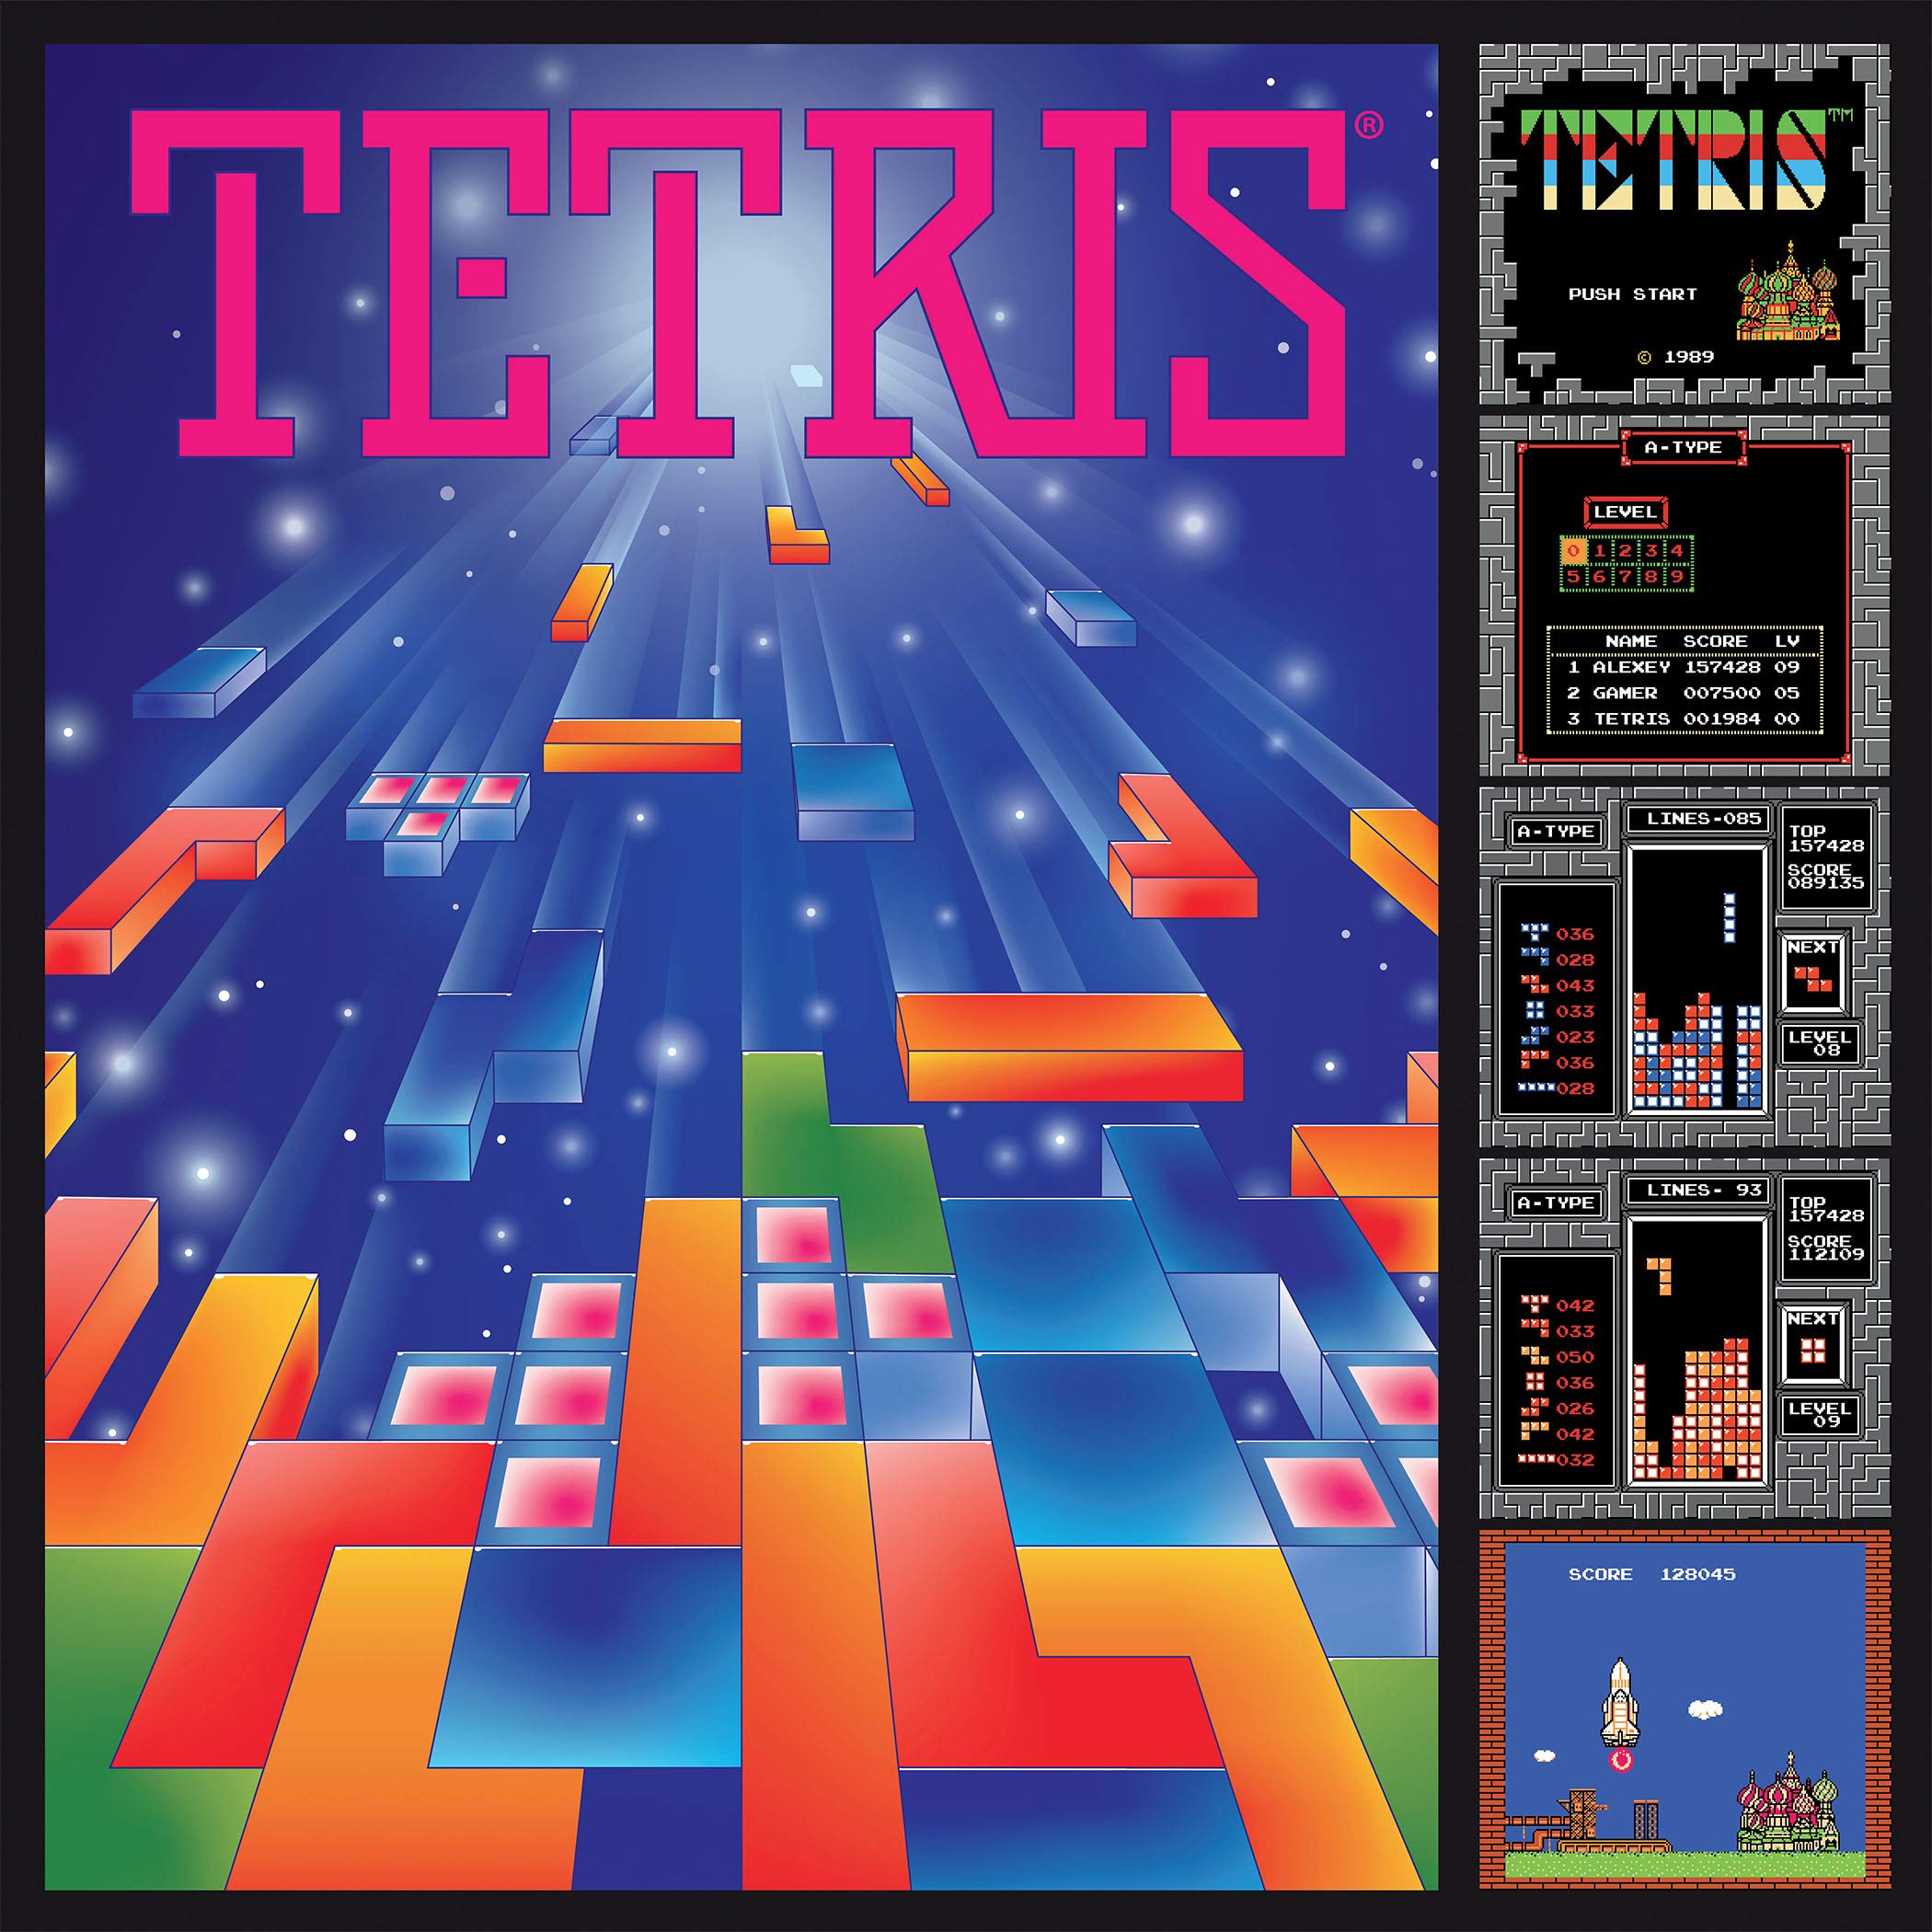 Ceaco - Tetris - Gaming Poster - 750 Piece Jigsaw Puzzle